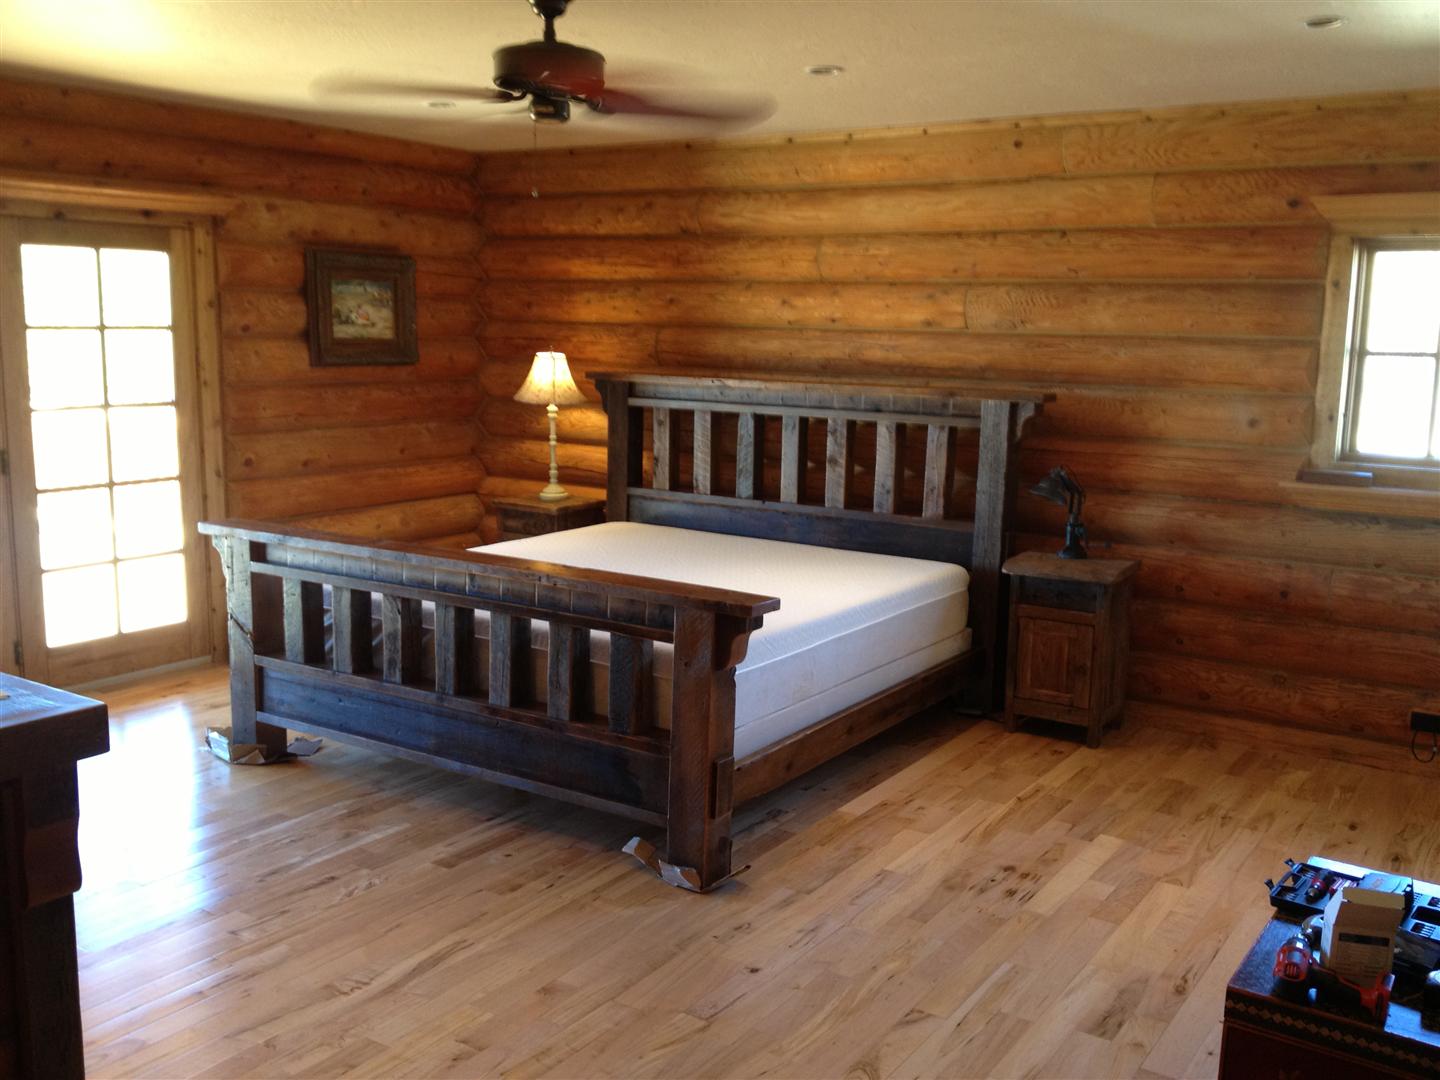 Home Priority: Homey Feeling of Rustic Bed Frames Ideas